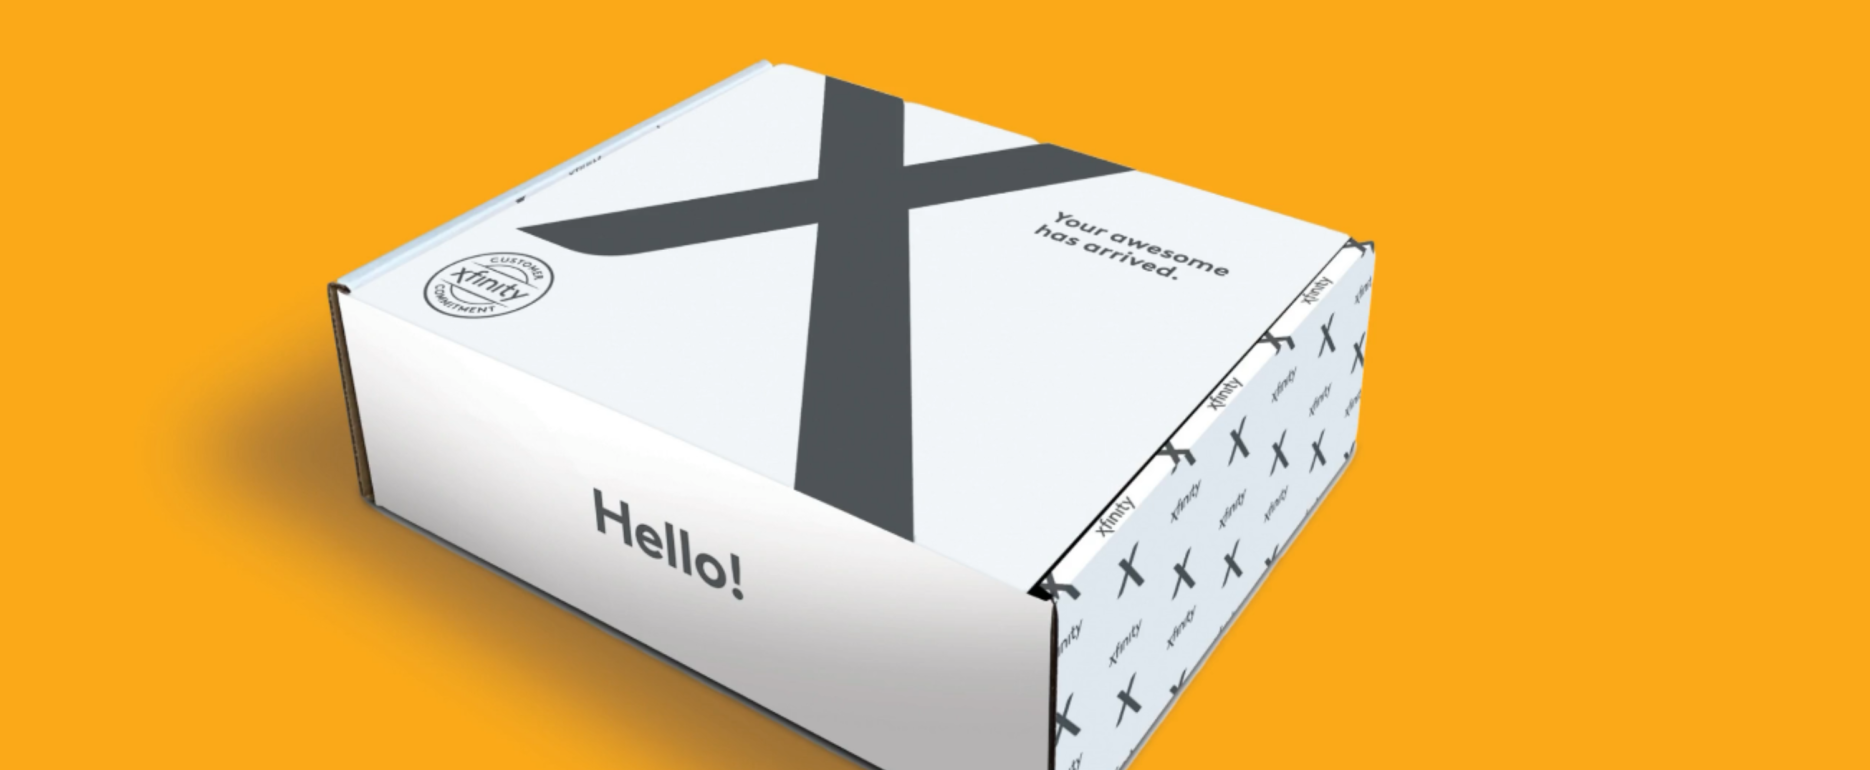 A white delivery box with a friendly "hello!" greeting, adorned with playful arrow patterns, sits against a warm orange background, evoking a sense of excitement for what's inside the Comcast subscription box.